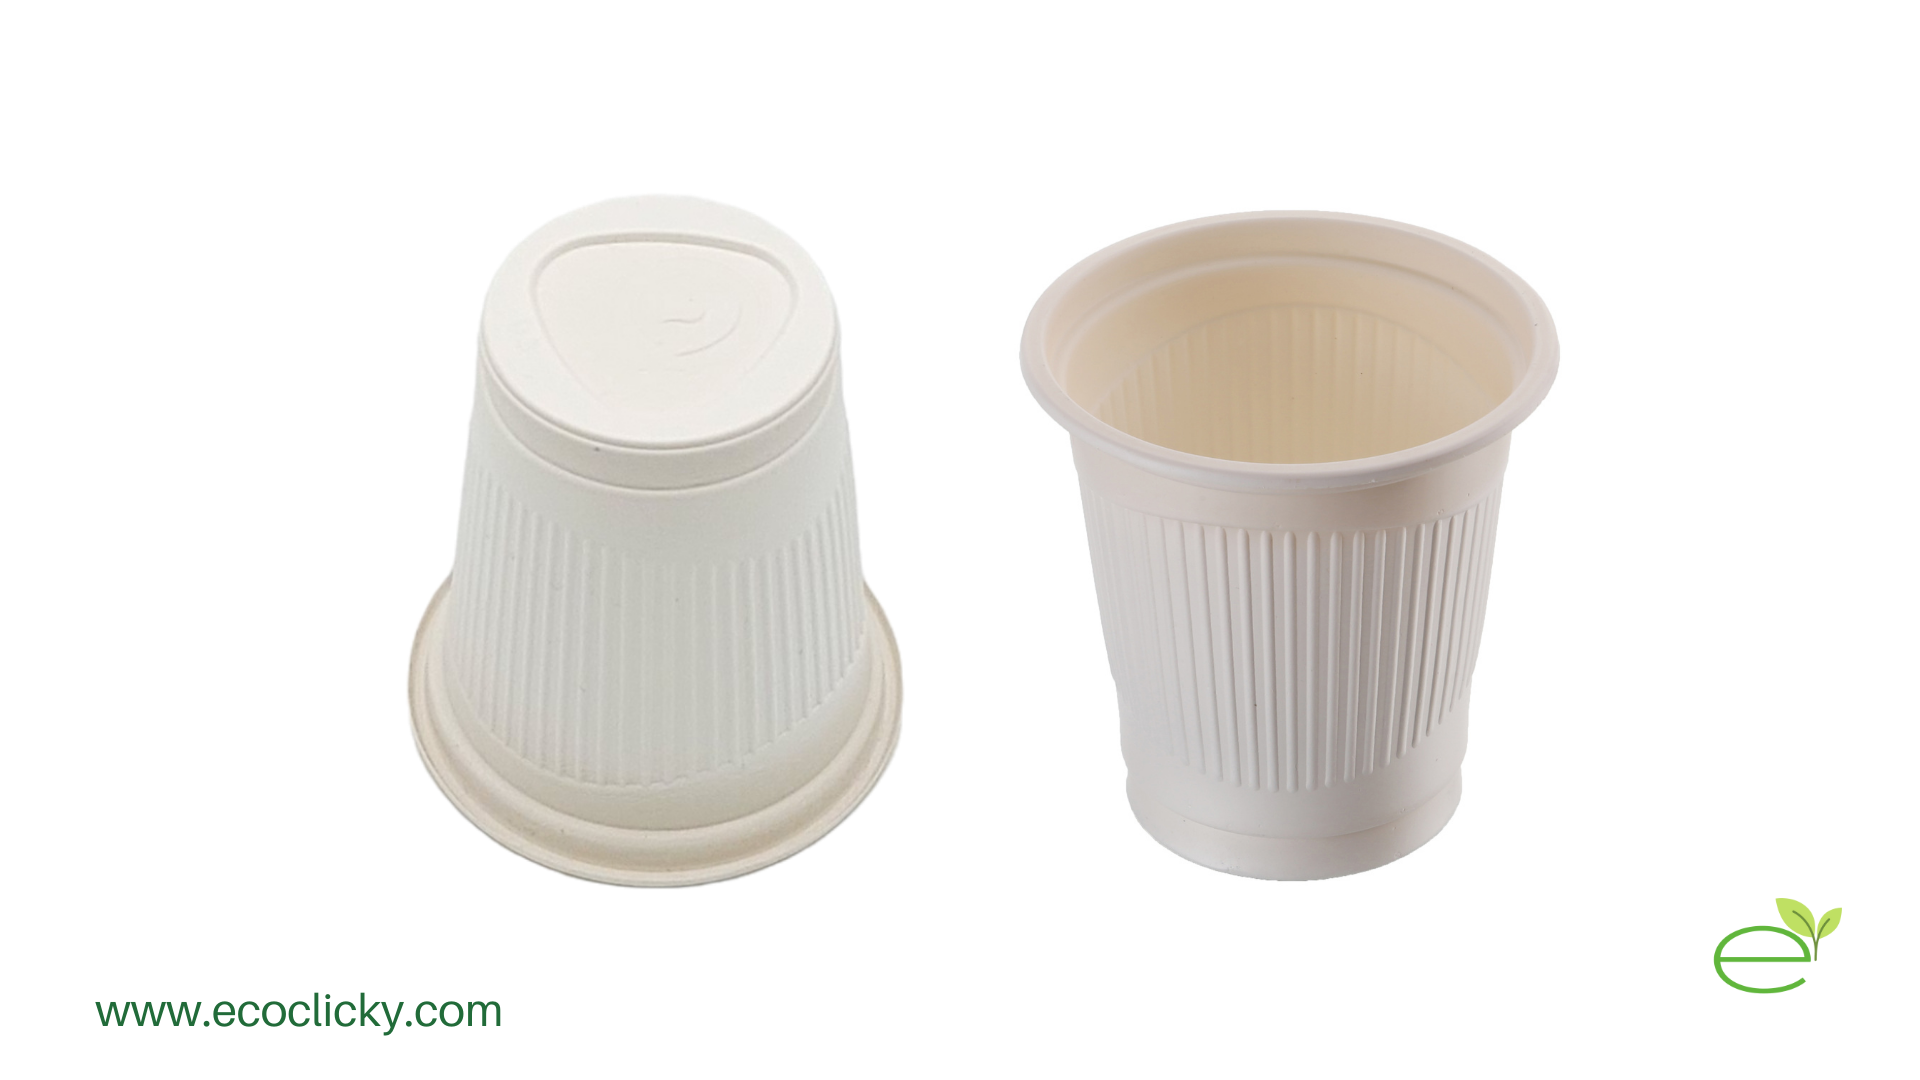 Buy Clean, Disposable and Hygienic cheap paper cups 